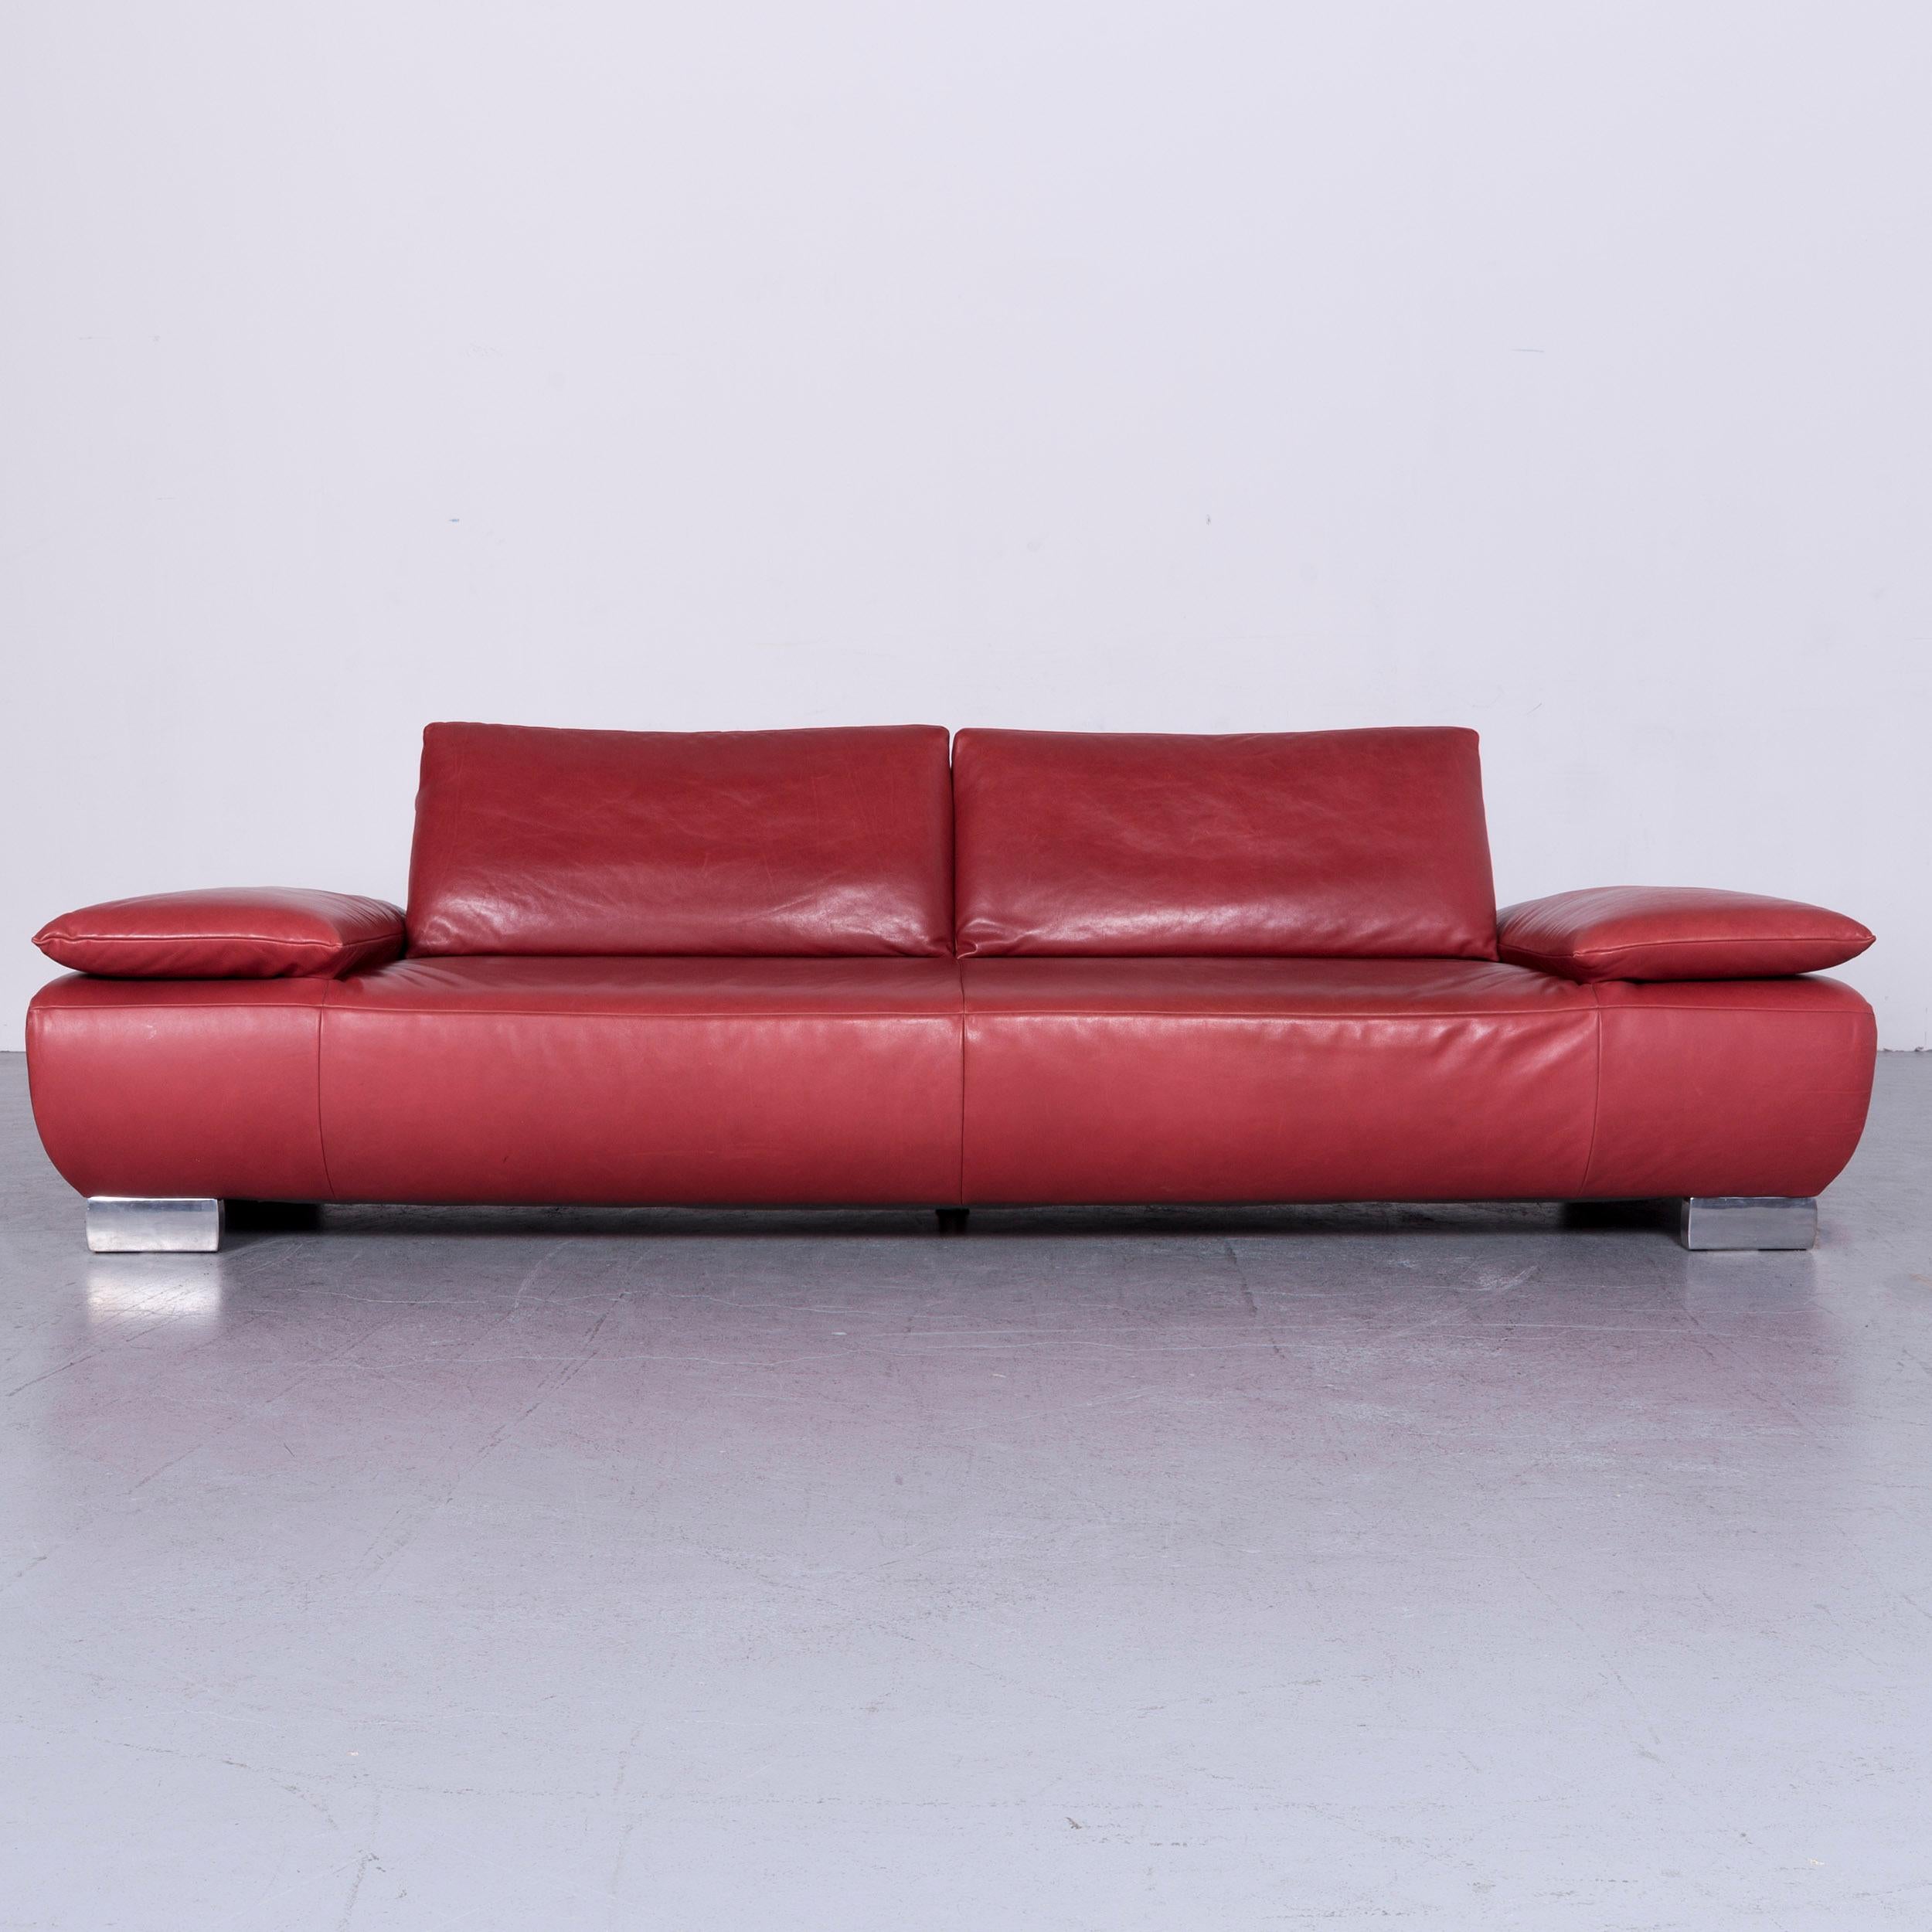 We bring to you an Koinor Volare designer sofa red three-seat leather couch with function.